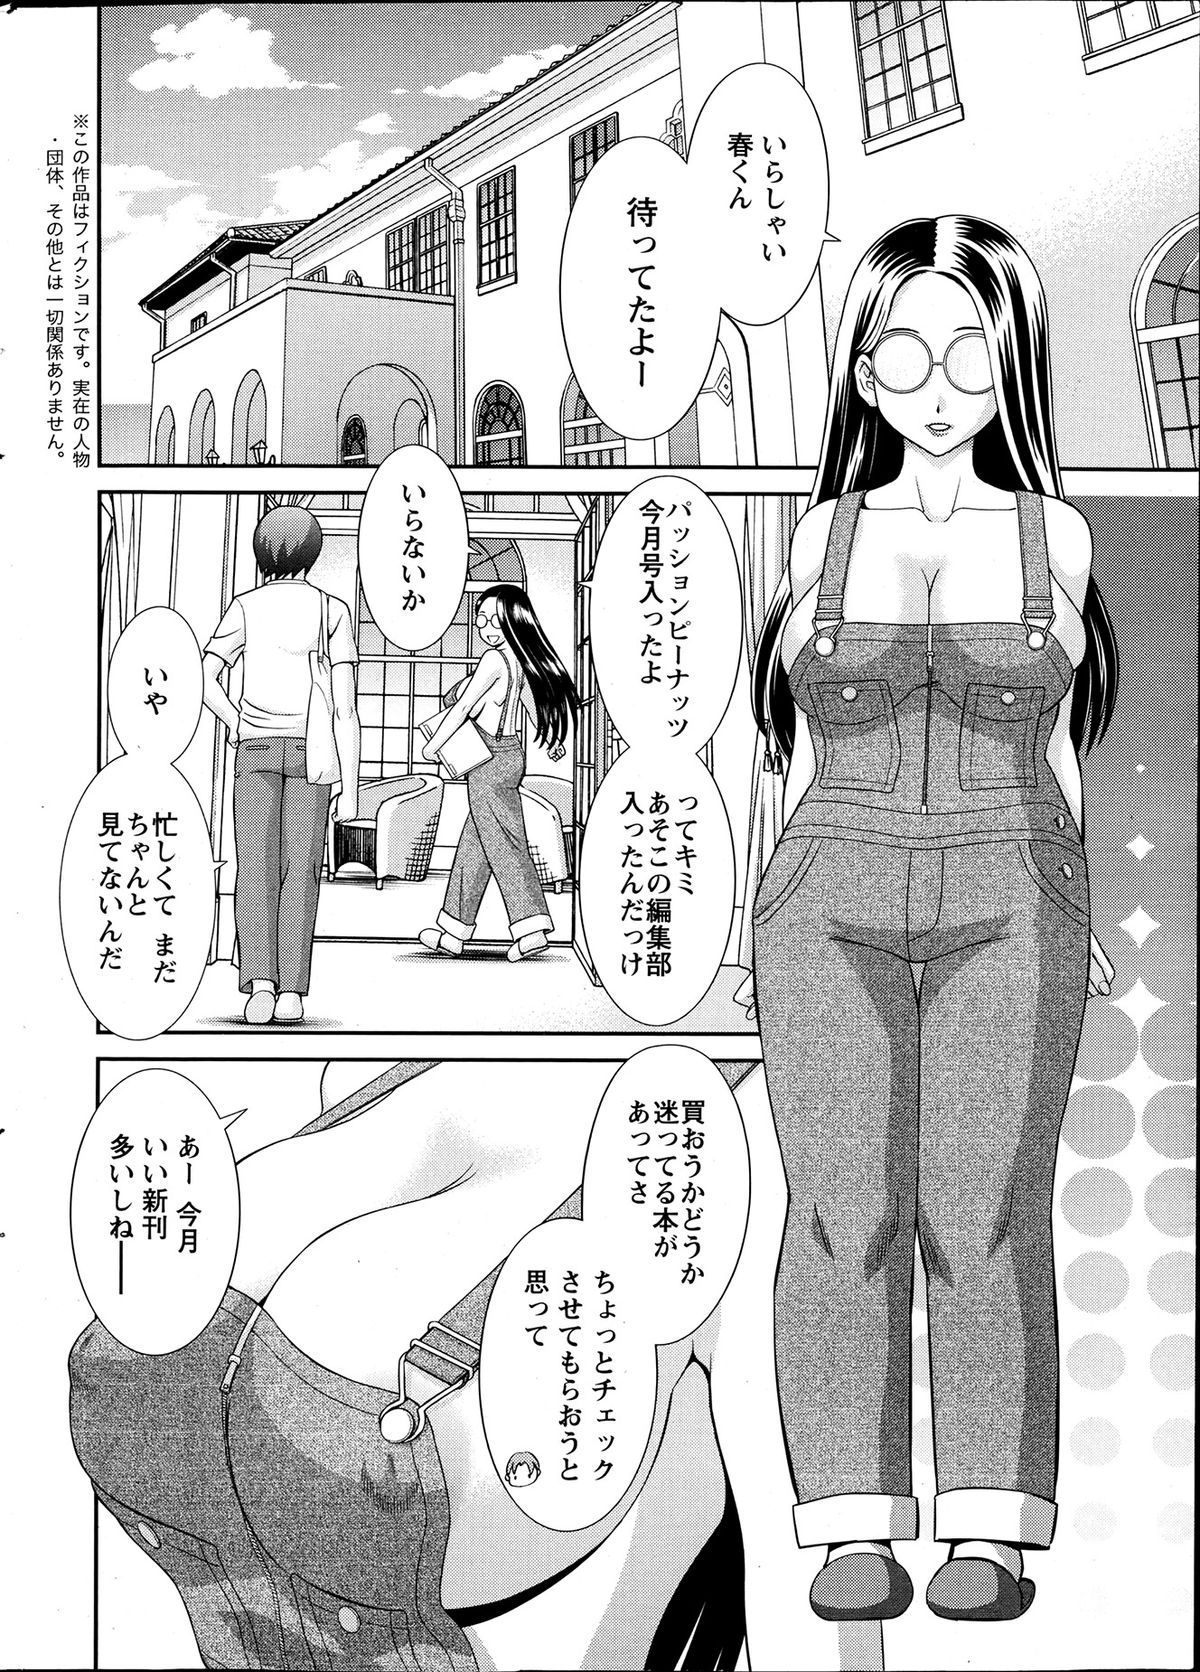 Action Pizazz DX 2013-07 page 7 full